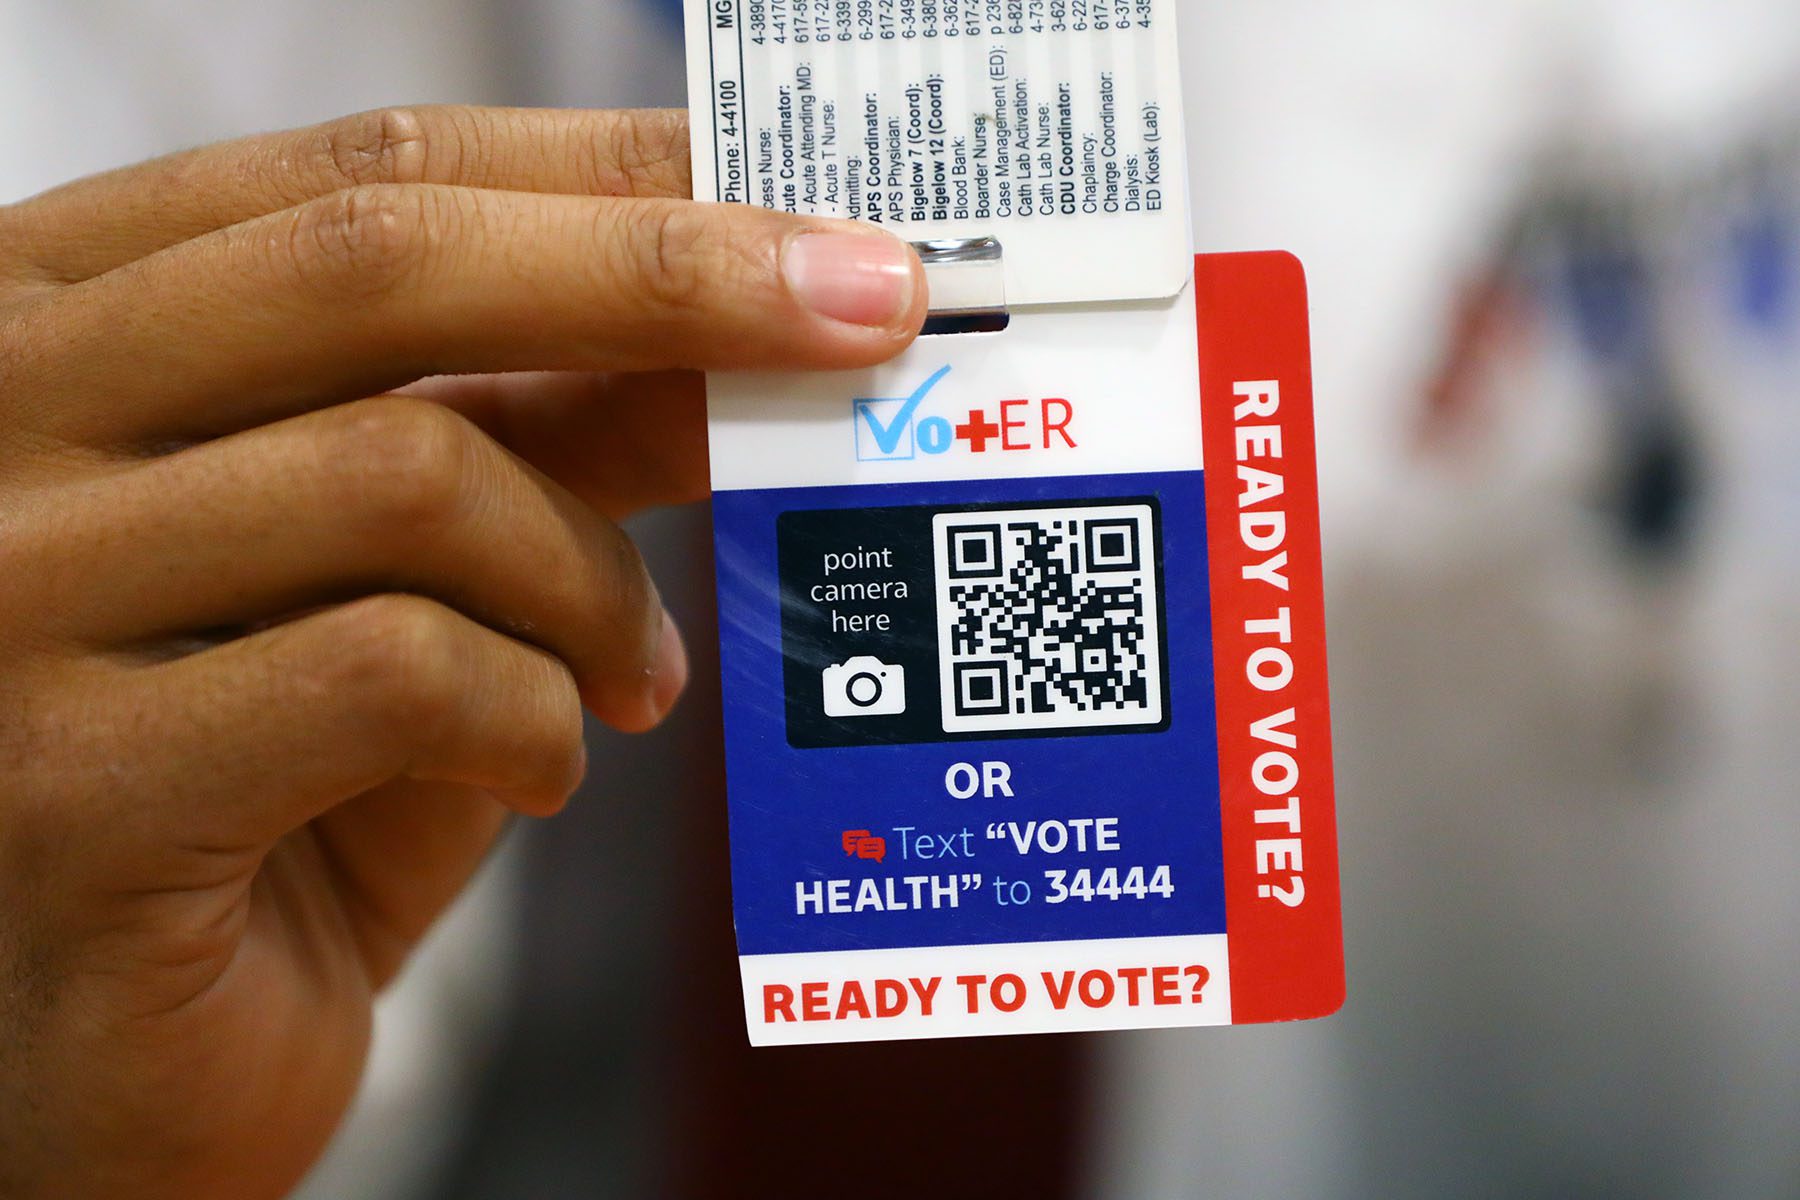 A "Vot-ER" card reads "READY TO VOTE?" with a QR code and a number to text to get registered to vote.